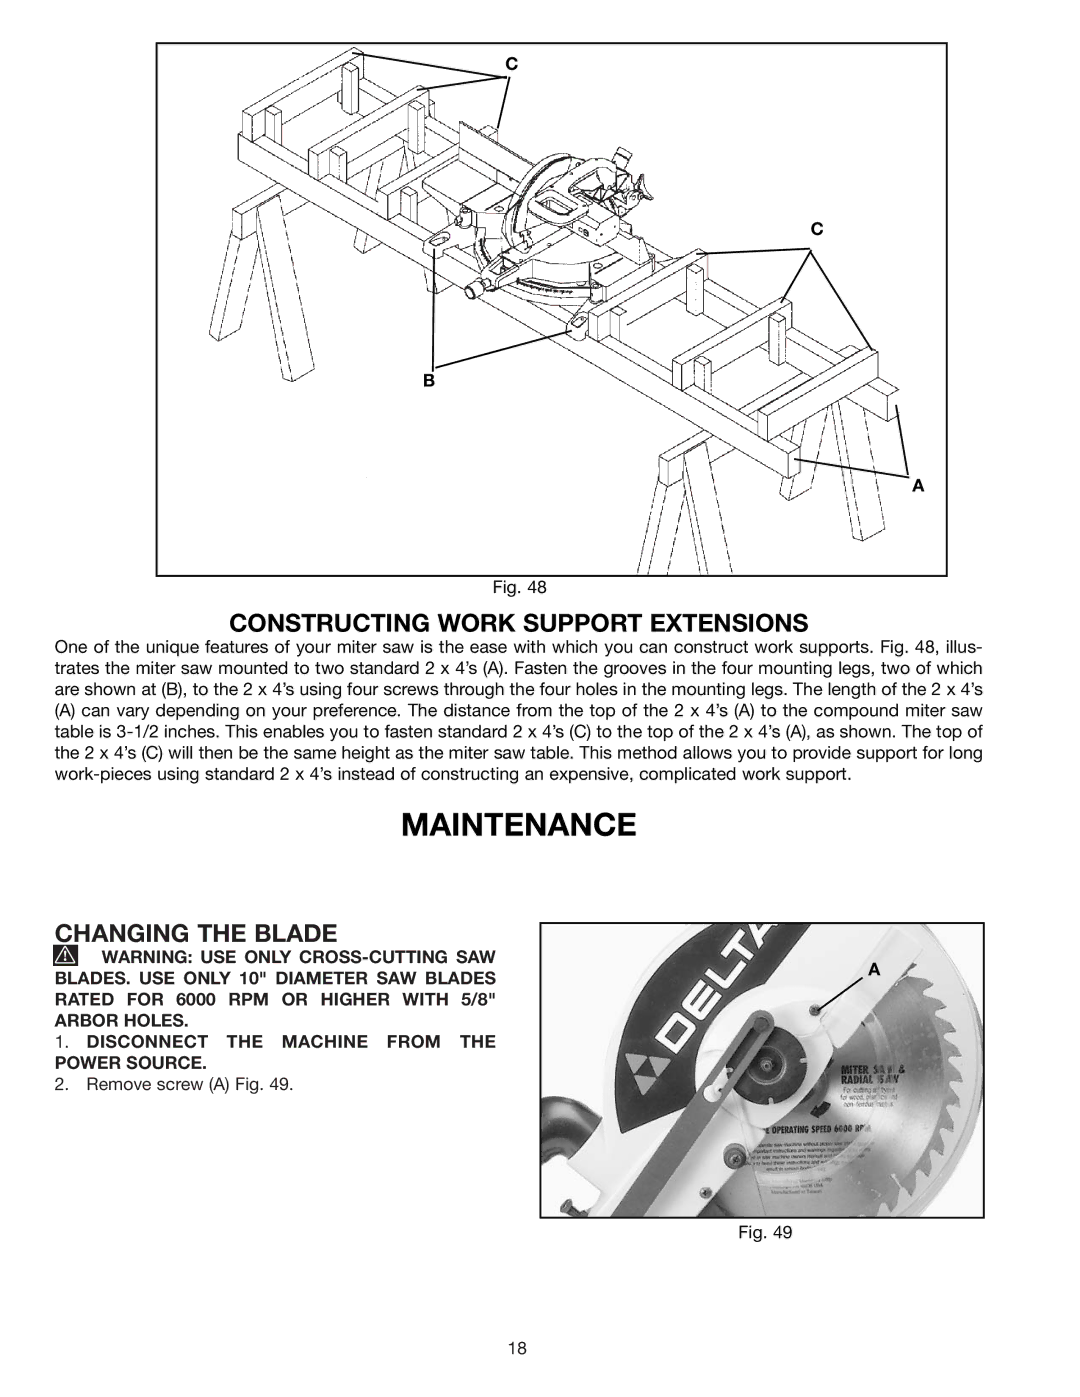 Porter-Cable 36-225 instruction manual Maintenance, Constructing Work Support Extensions 